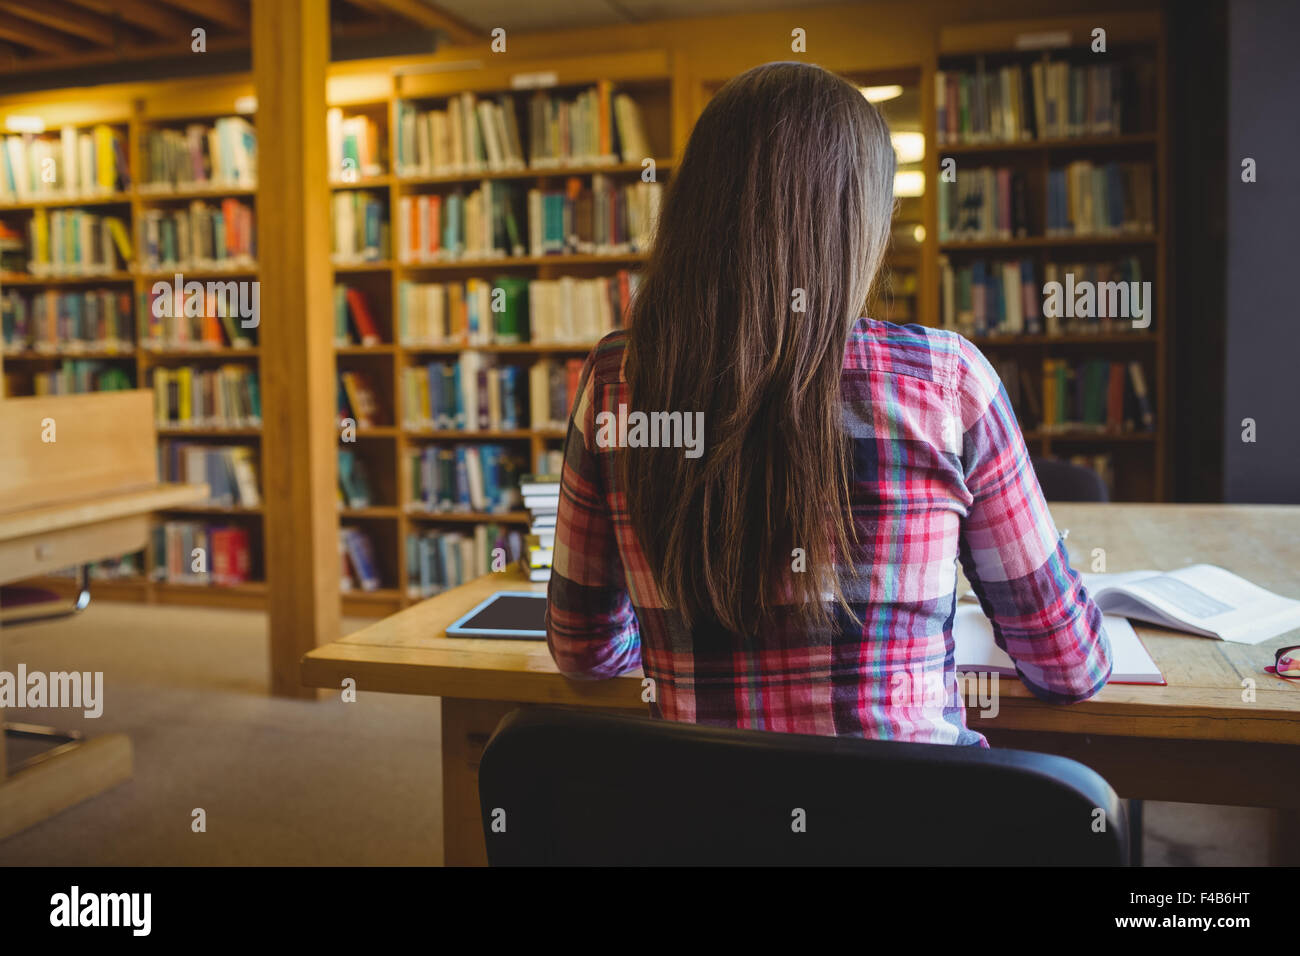 Rear view of female student studying Stock Photo